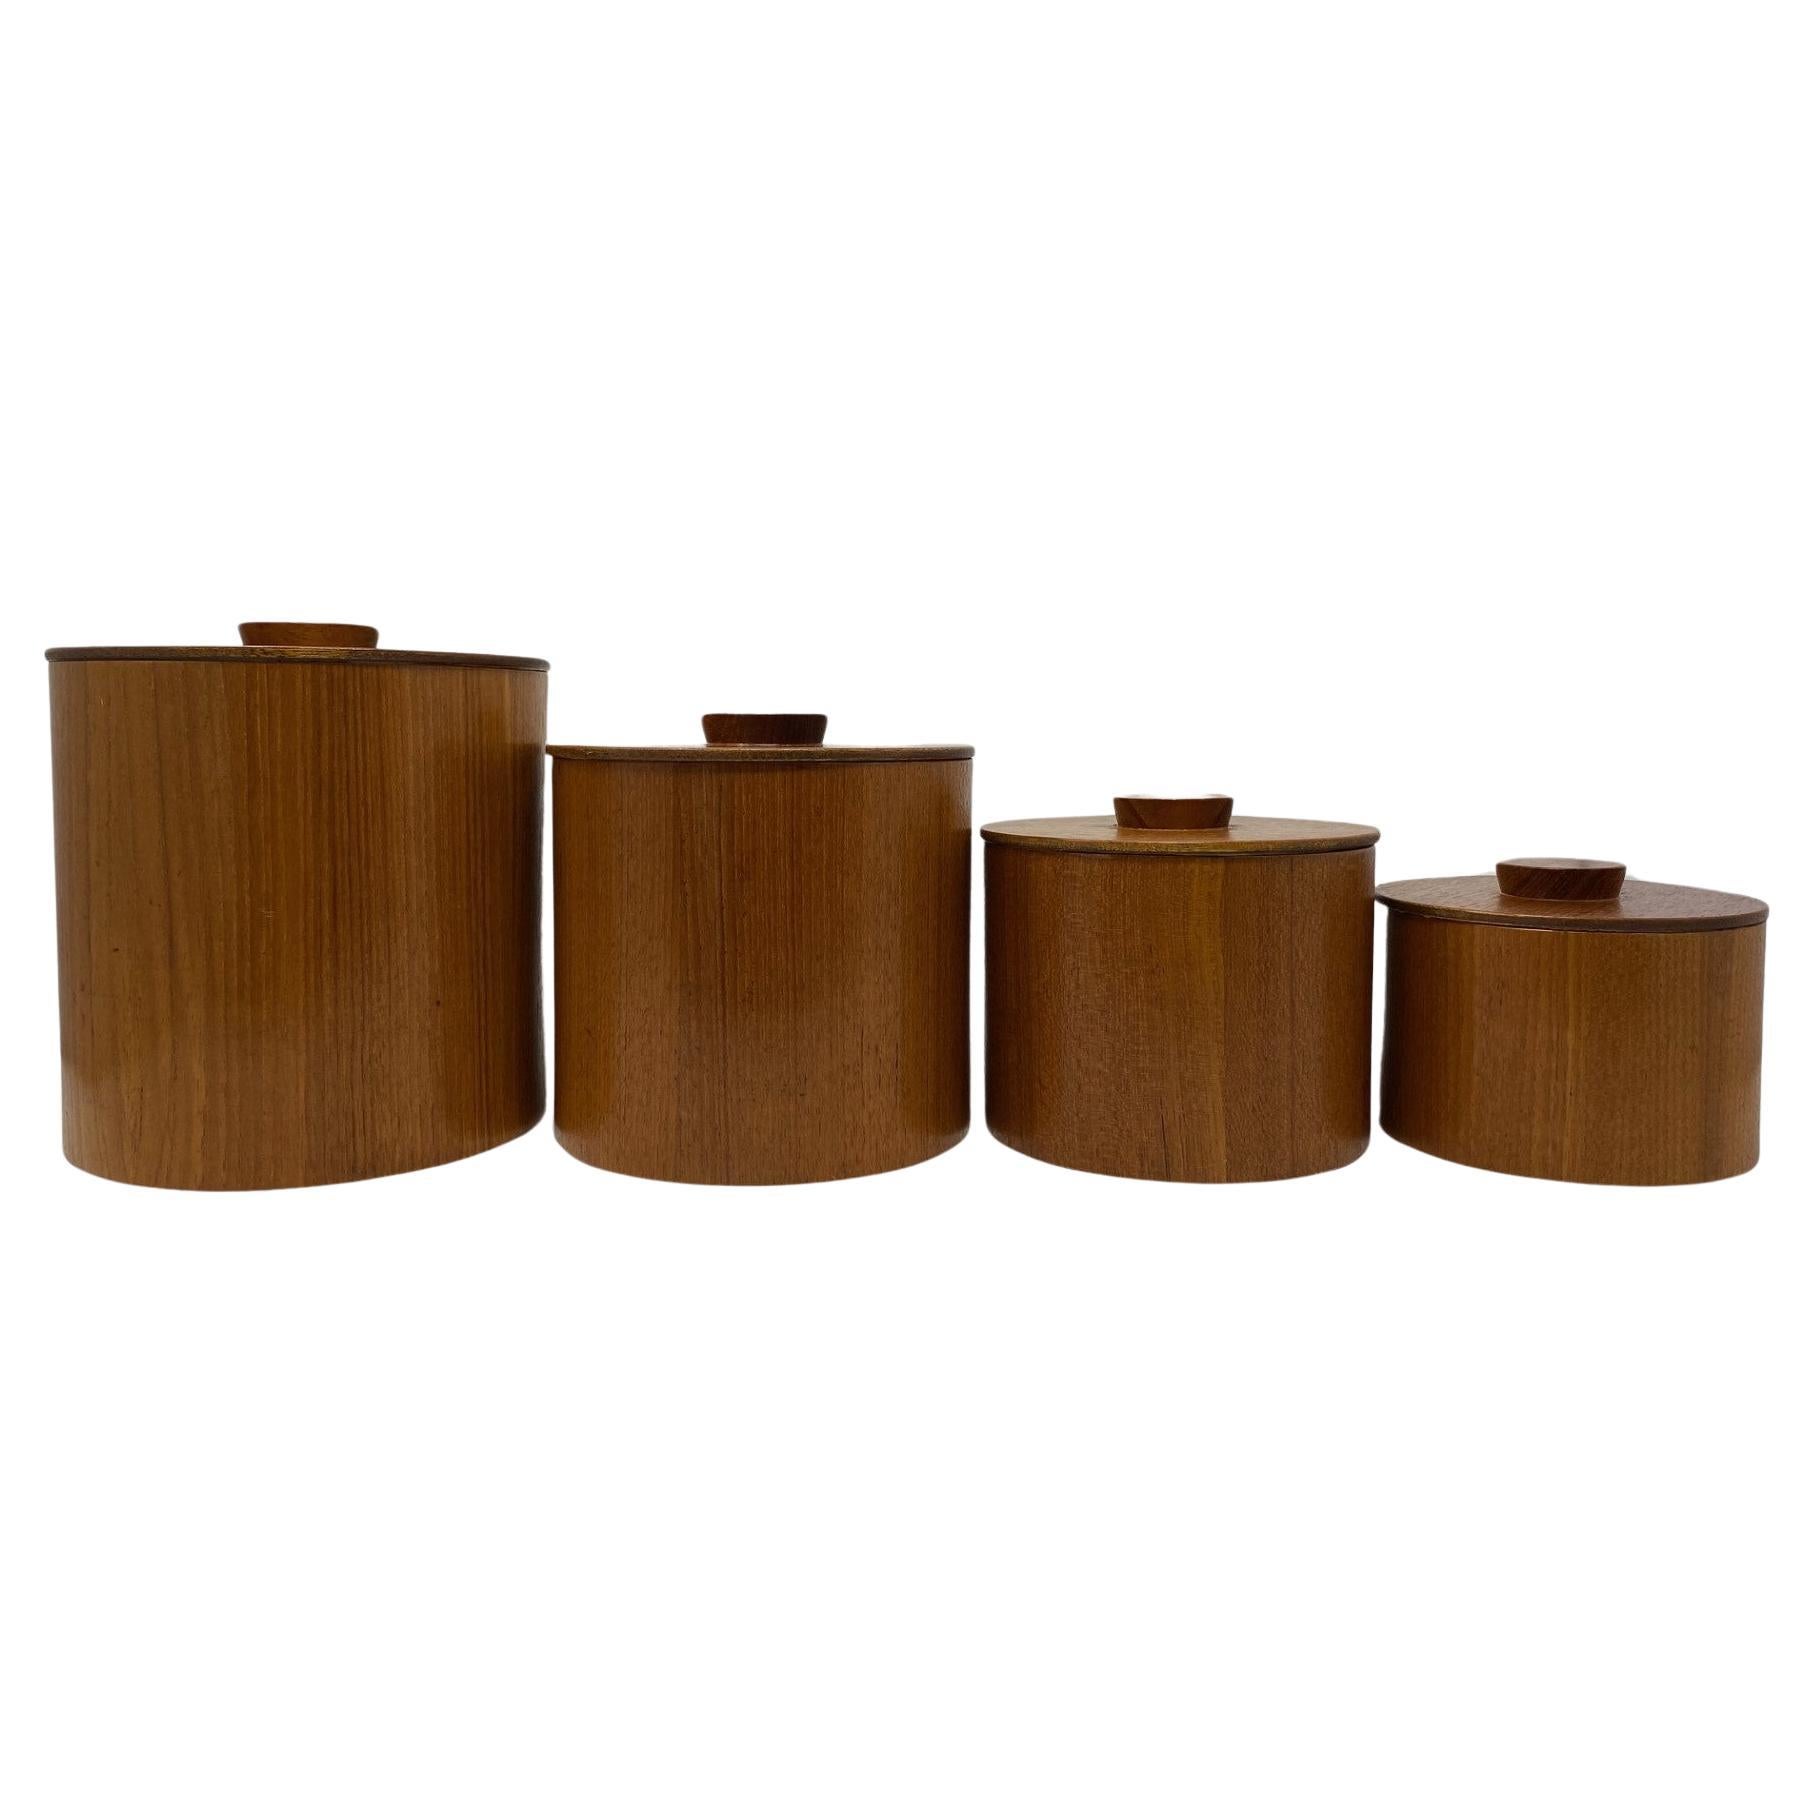 Rare Vintage Set of 4 Nesting Teak Canisters from Japan Mid-Century 1960s For Sale